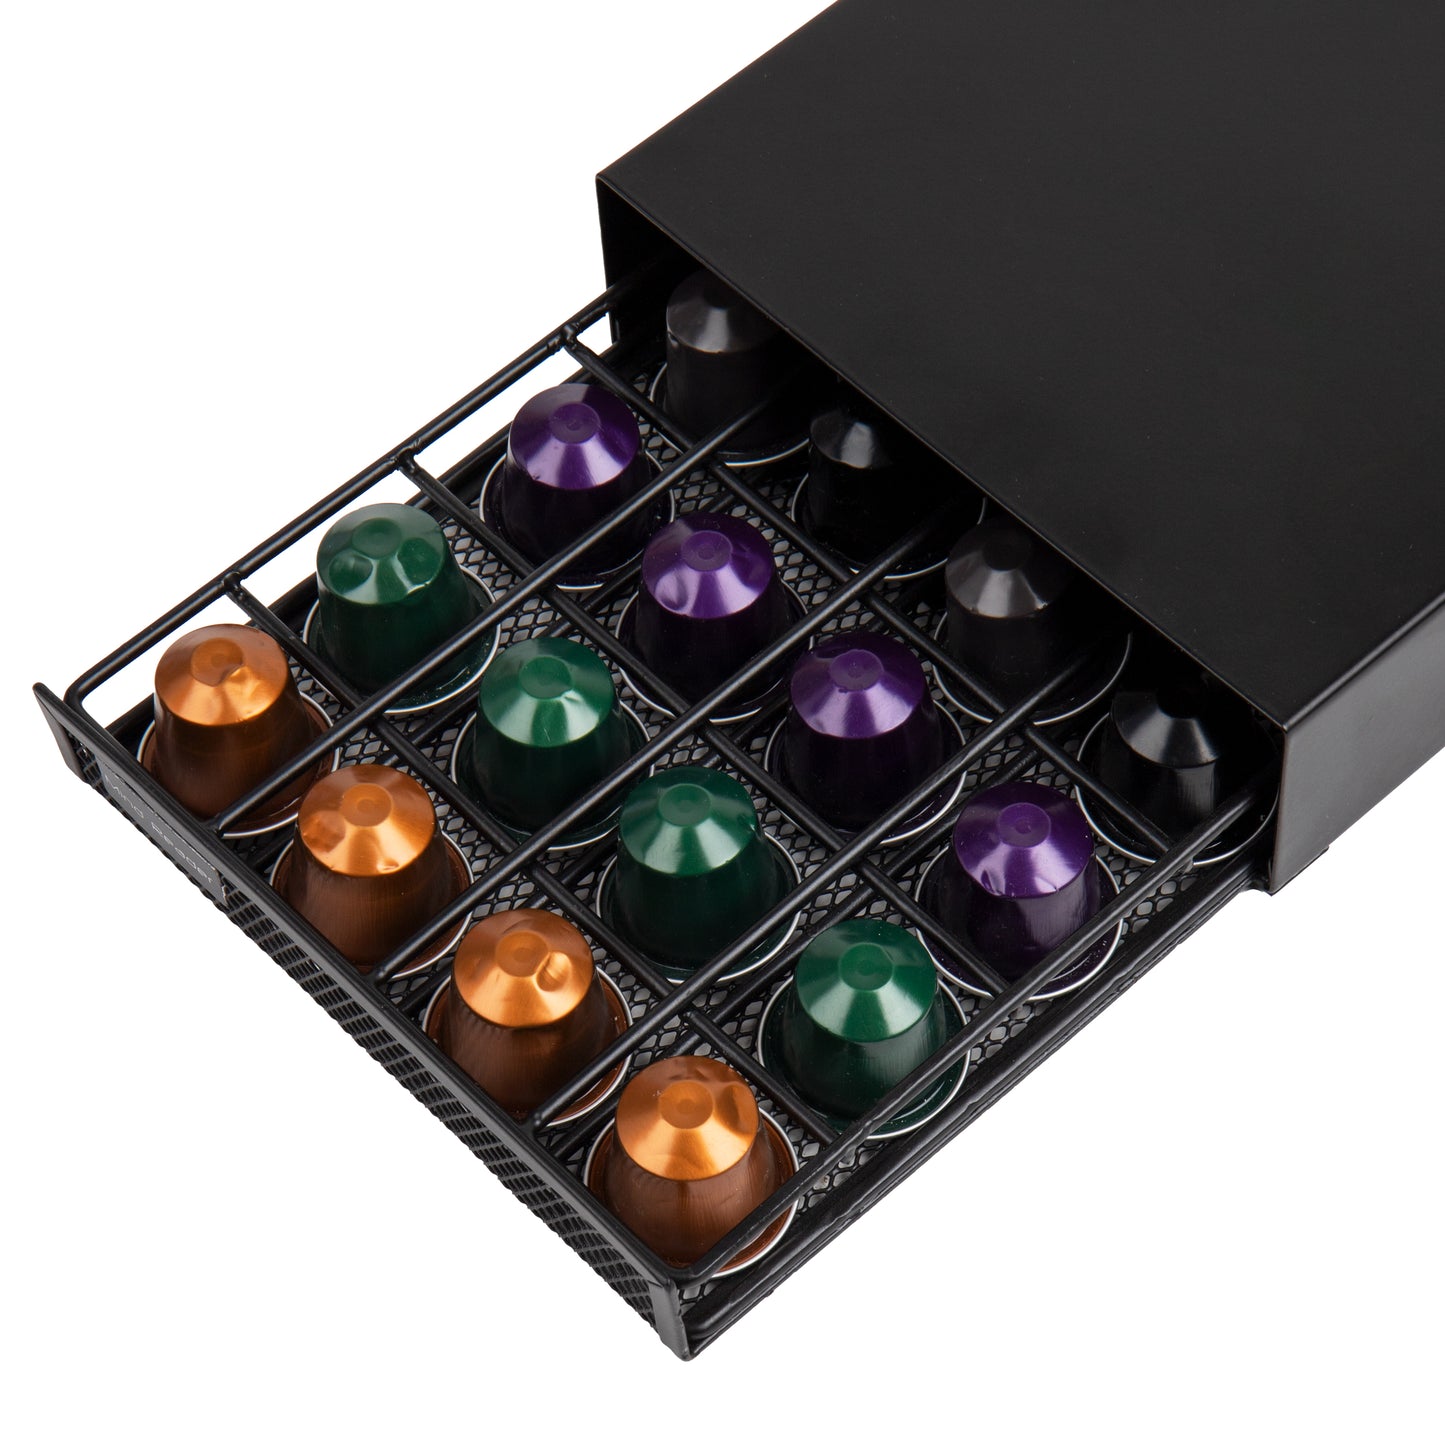 Mind Reader Network Collection, Single Serve Nespresso/Vertuoline Compatible Capsule Drawer, 20 Capsule Capacity, Countertop Organizer, Coffee Machine Base, Solid Metal Top with Mesh Drawer, Black